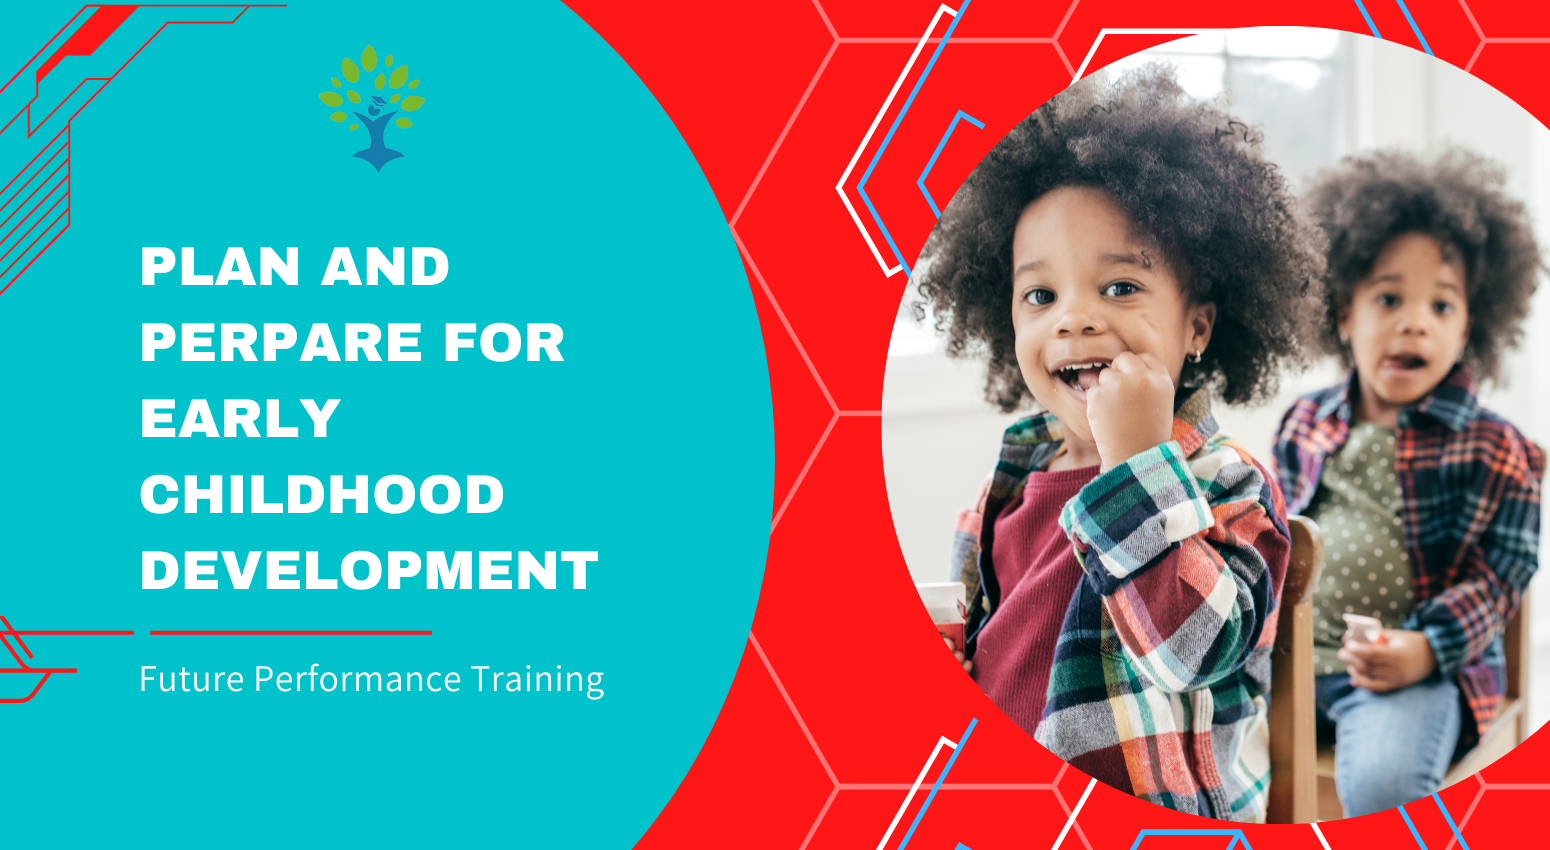 Plan and prepare for Early Childhood Development